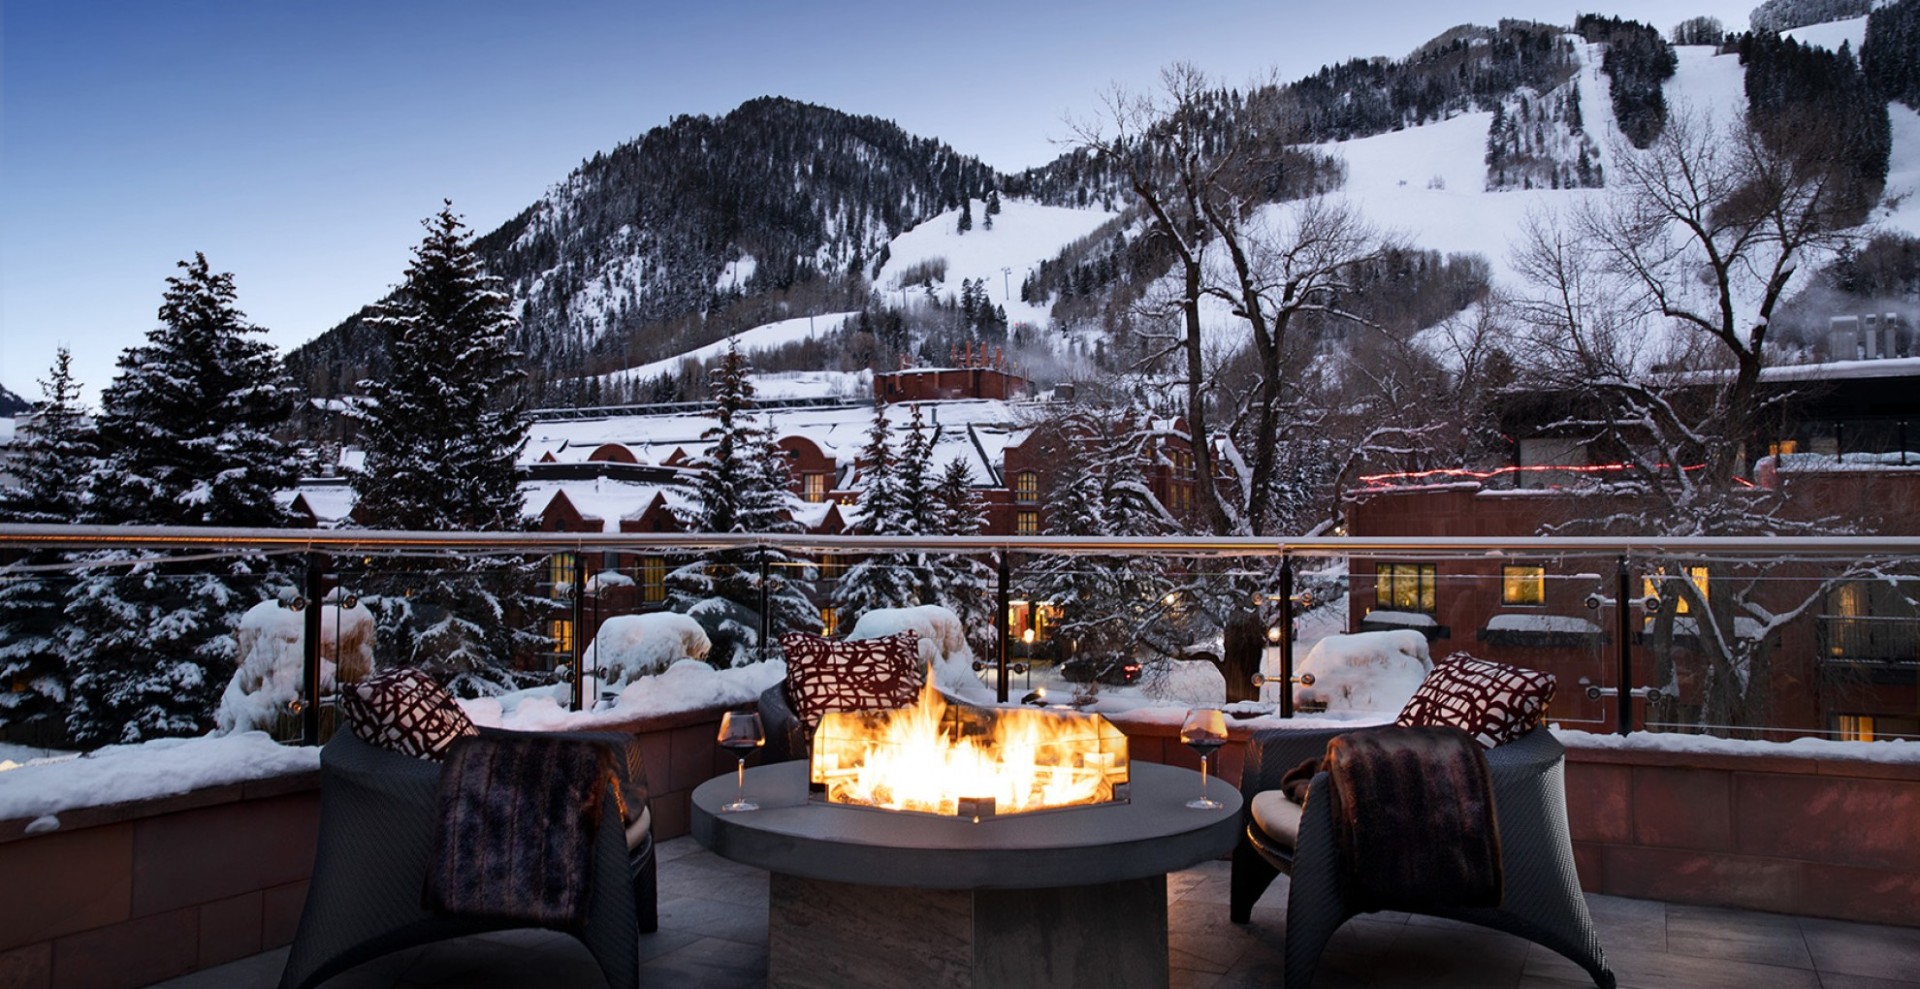 Firepit and Snowy View